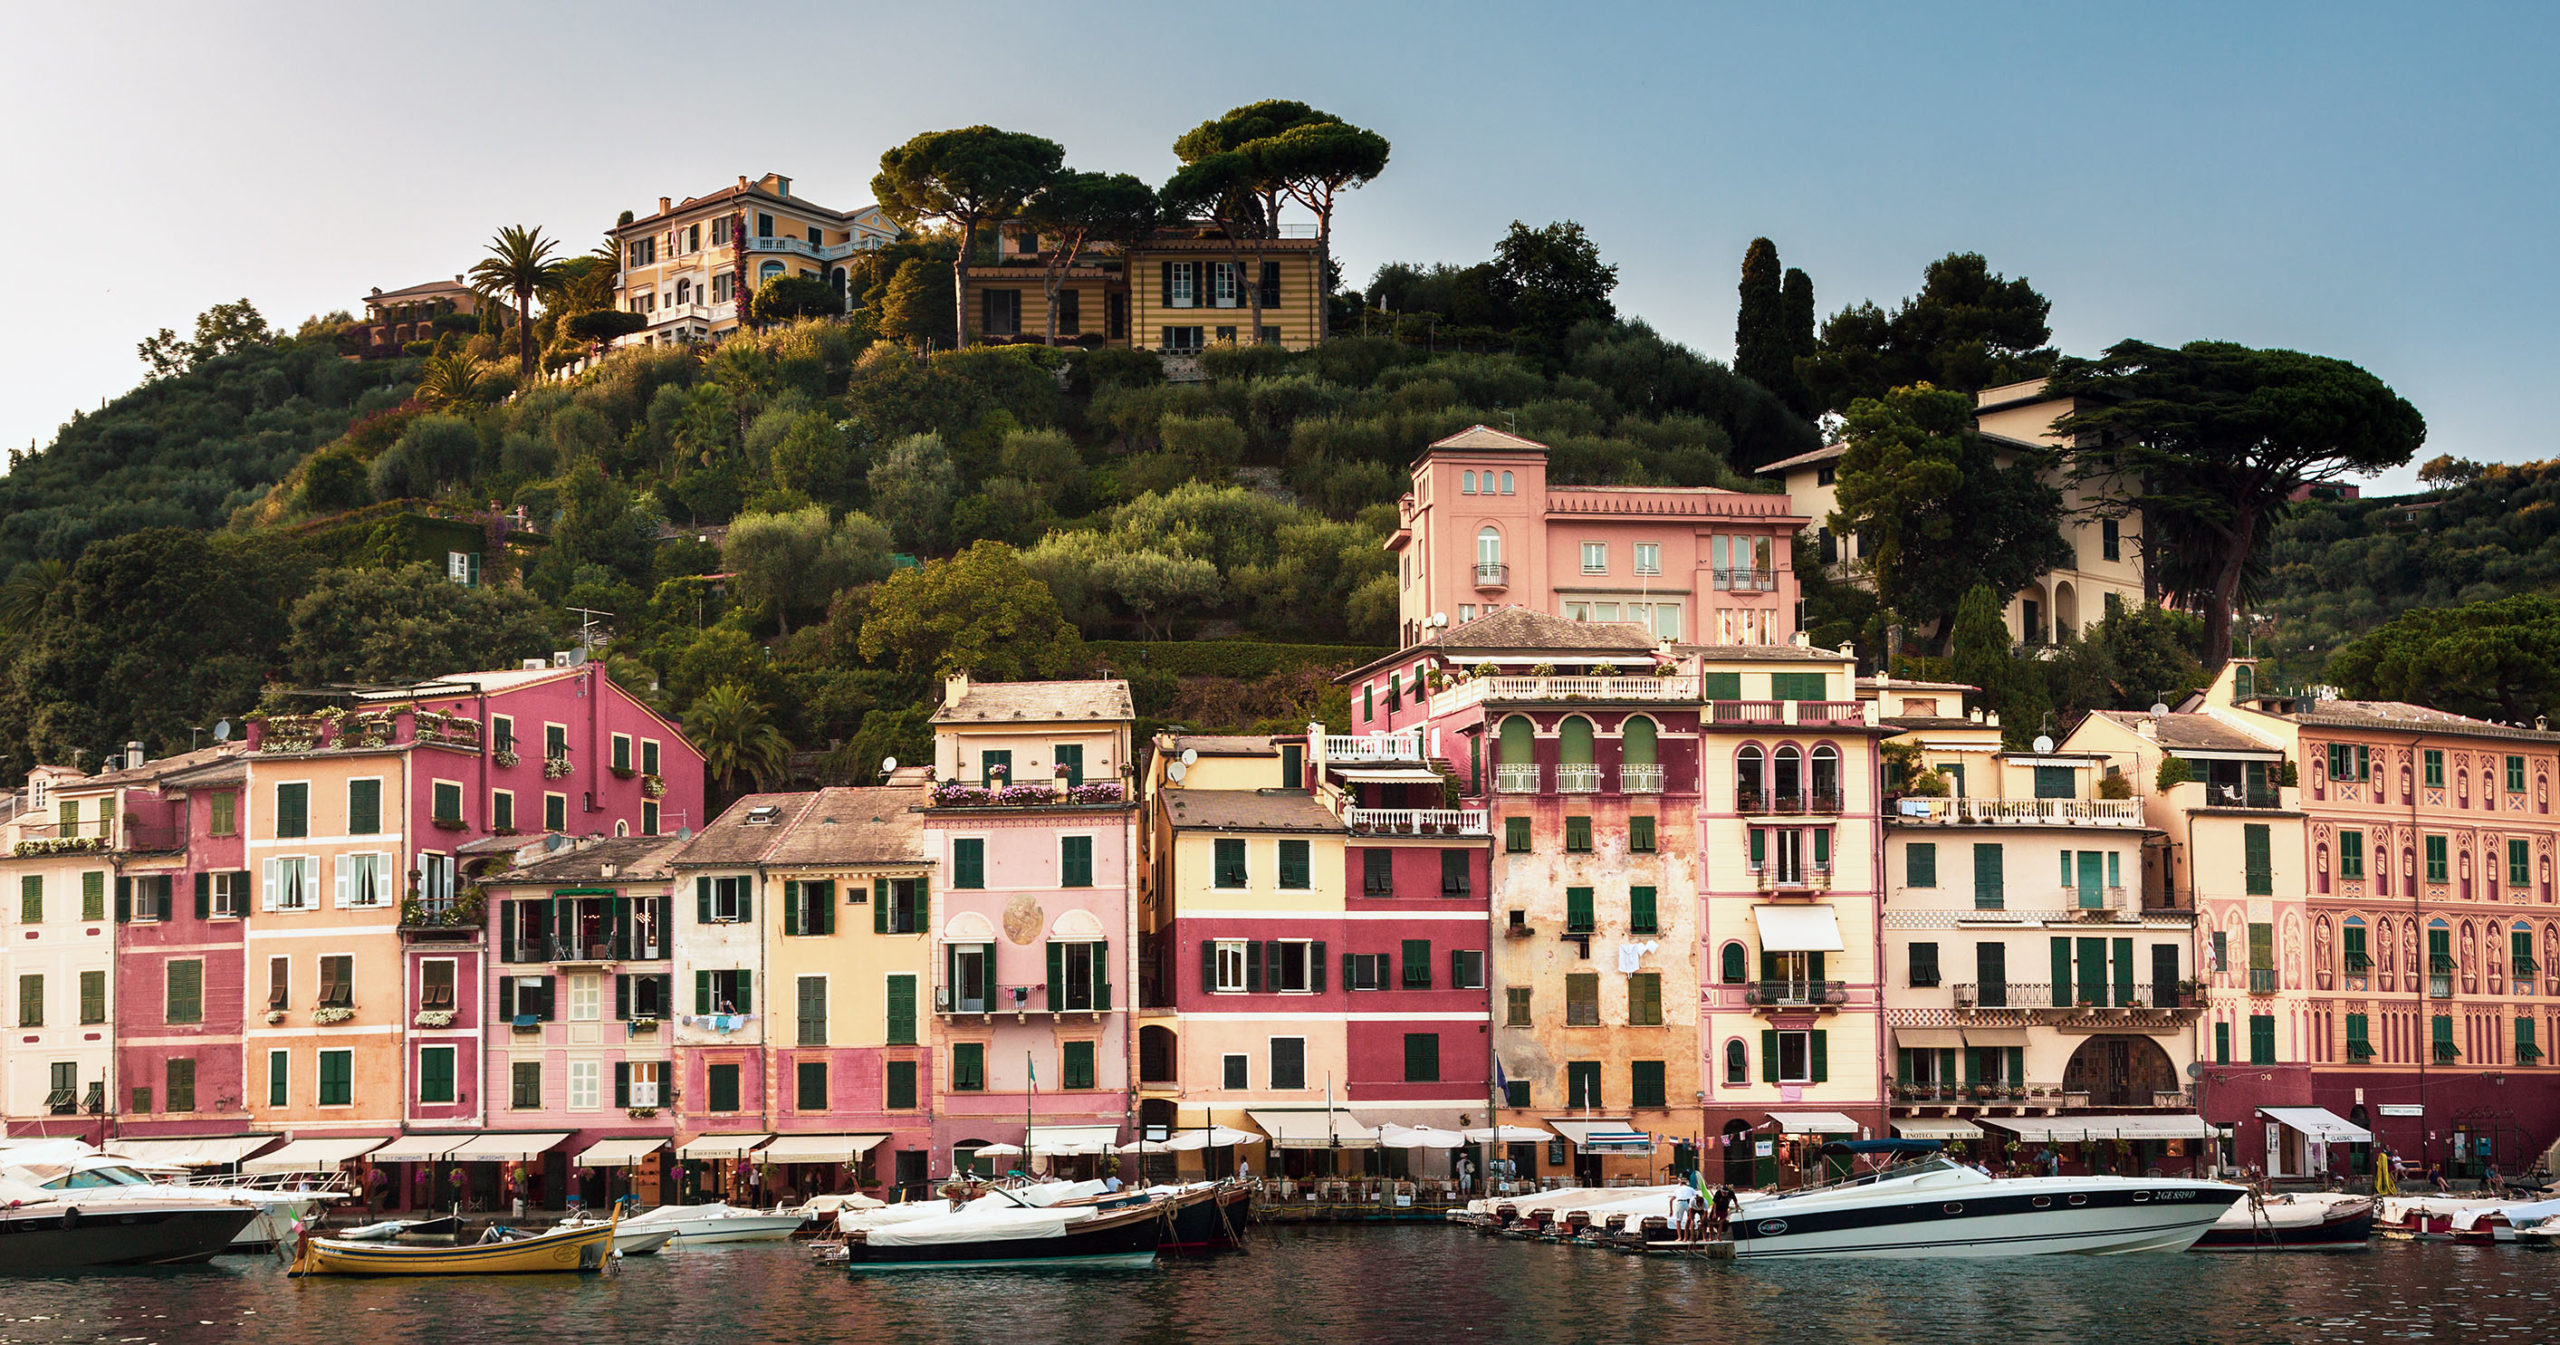 Portofino is a fishing village on the Italian Riviera coastline, southeast of Genoa city. Pastel-colored houses, border its piazza, a small cobbled square overlooking the harbor, which is lined with super-yachts.